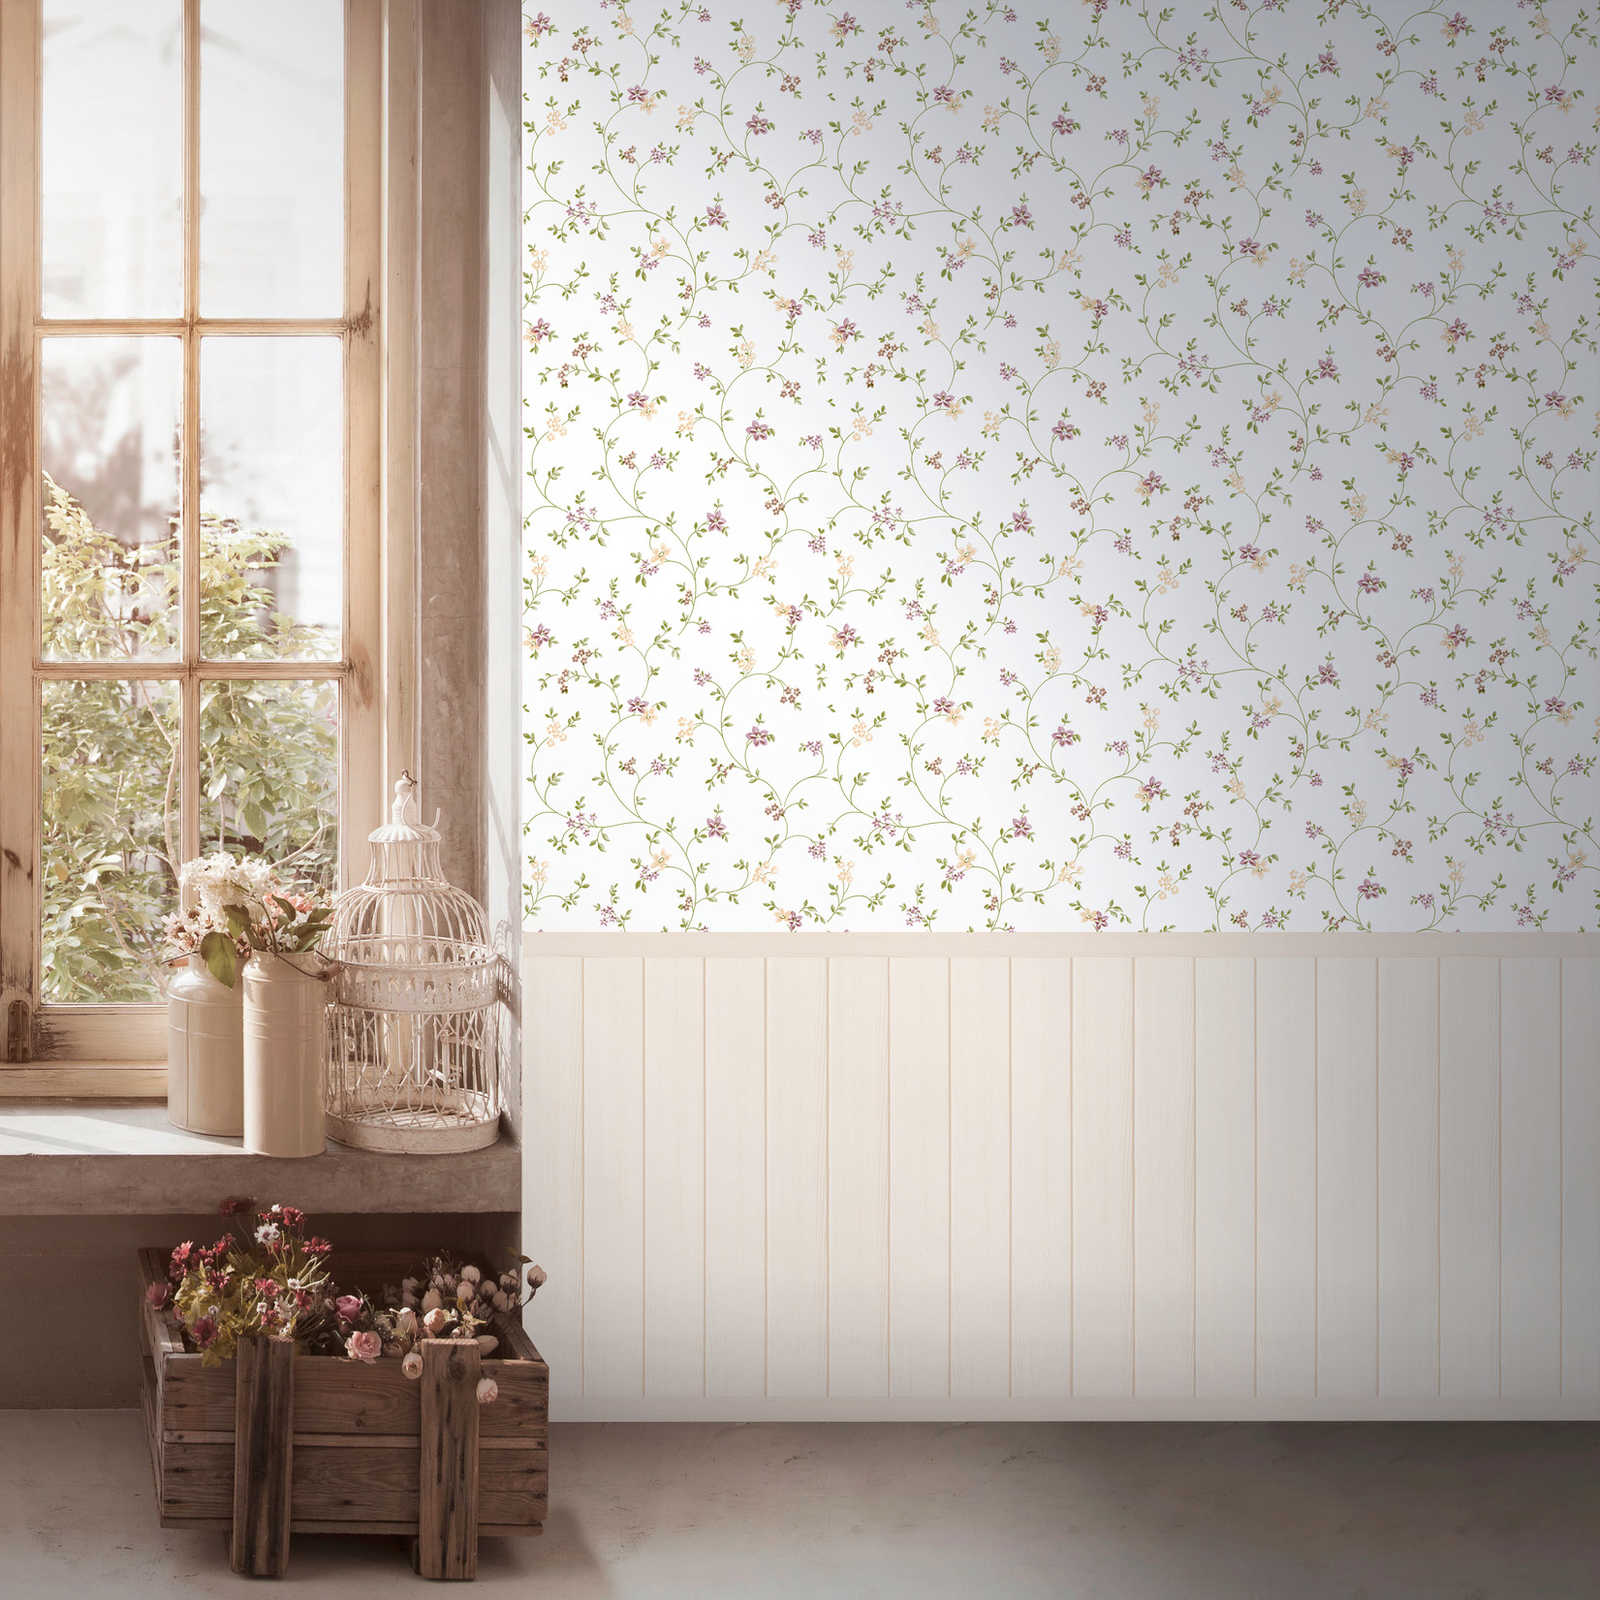 Non-woven motif wallpaper with wood-effect plinth border and floral pattern - beige, white, pink, green
